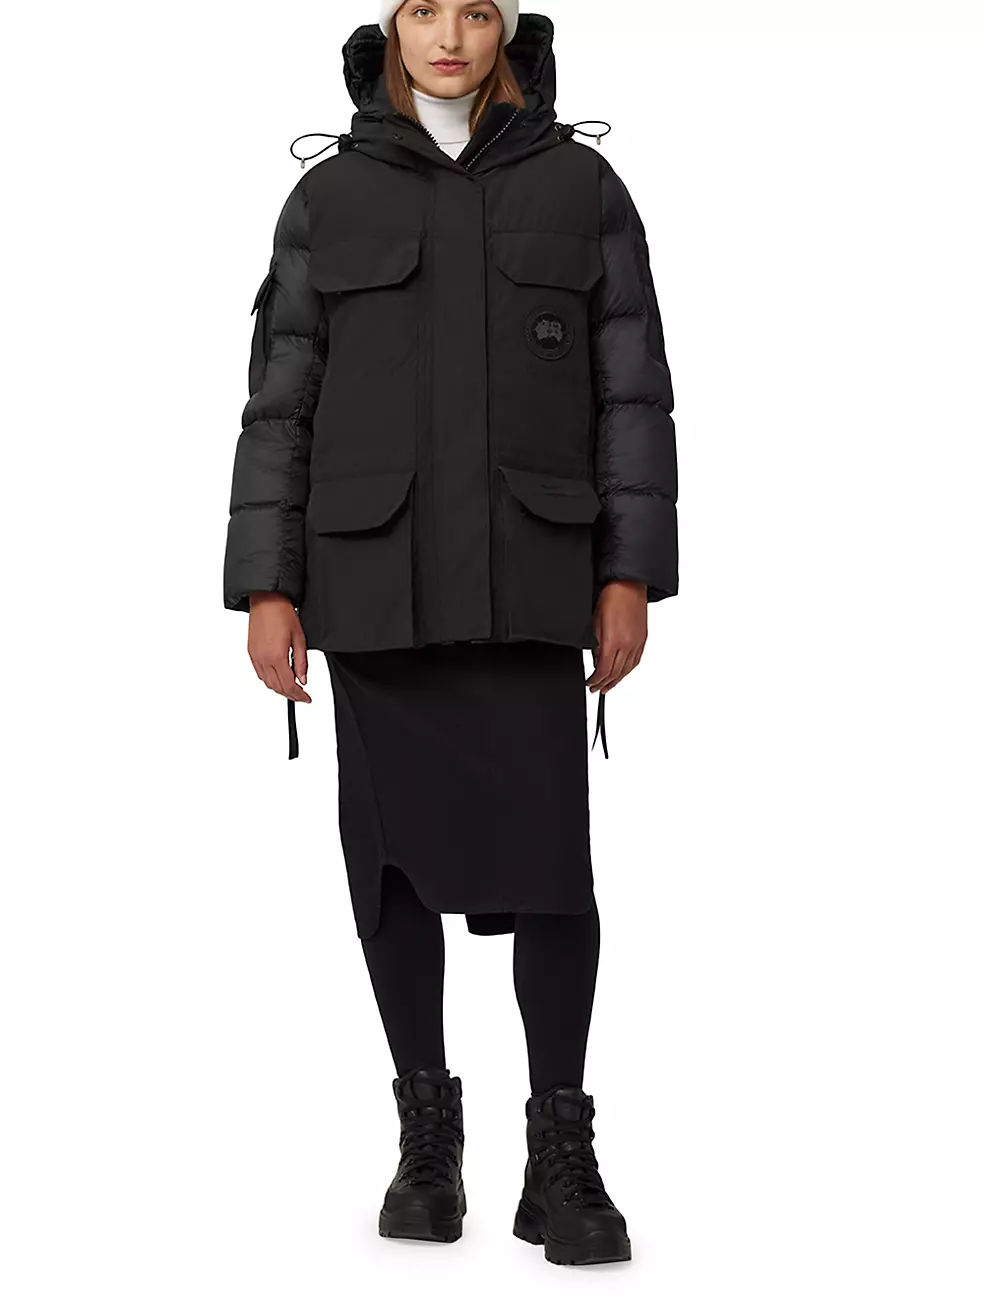 Vetements Canada Goose Collaboration Now on SSENSE